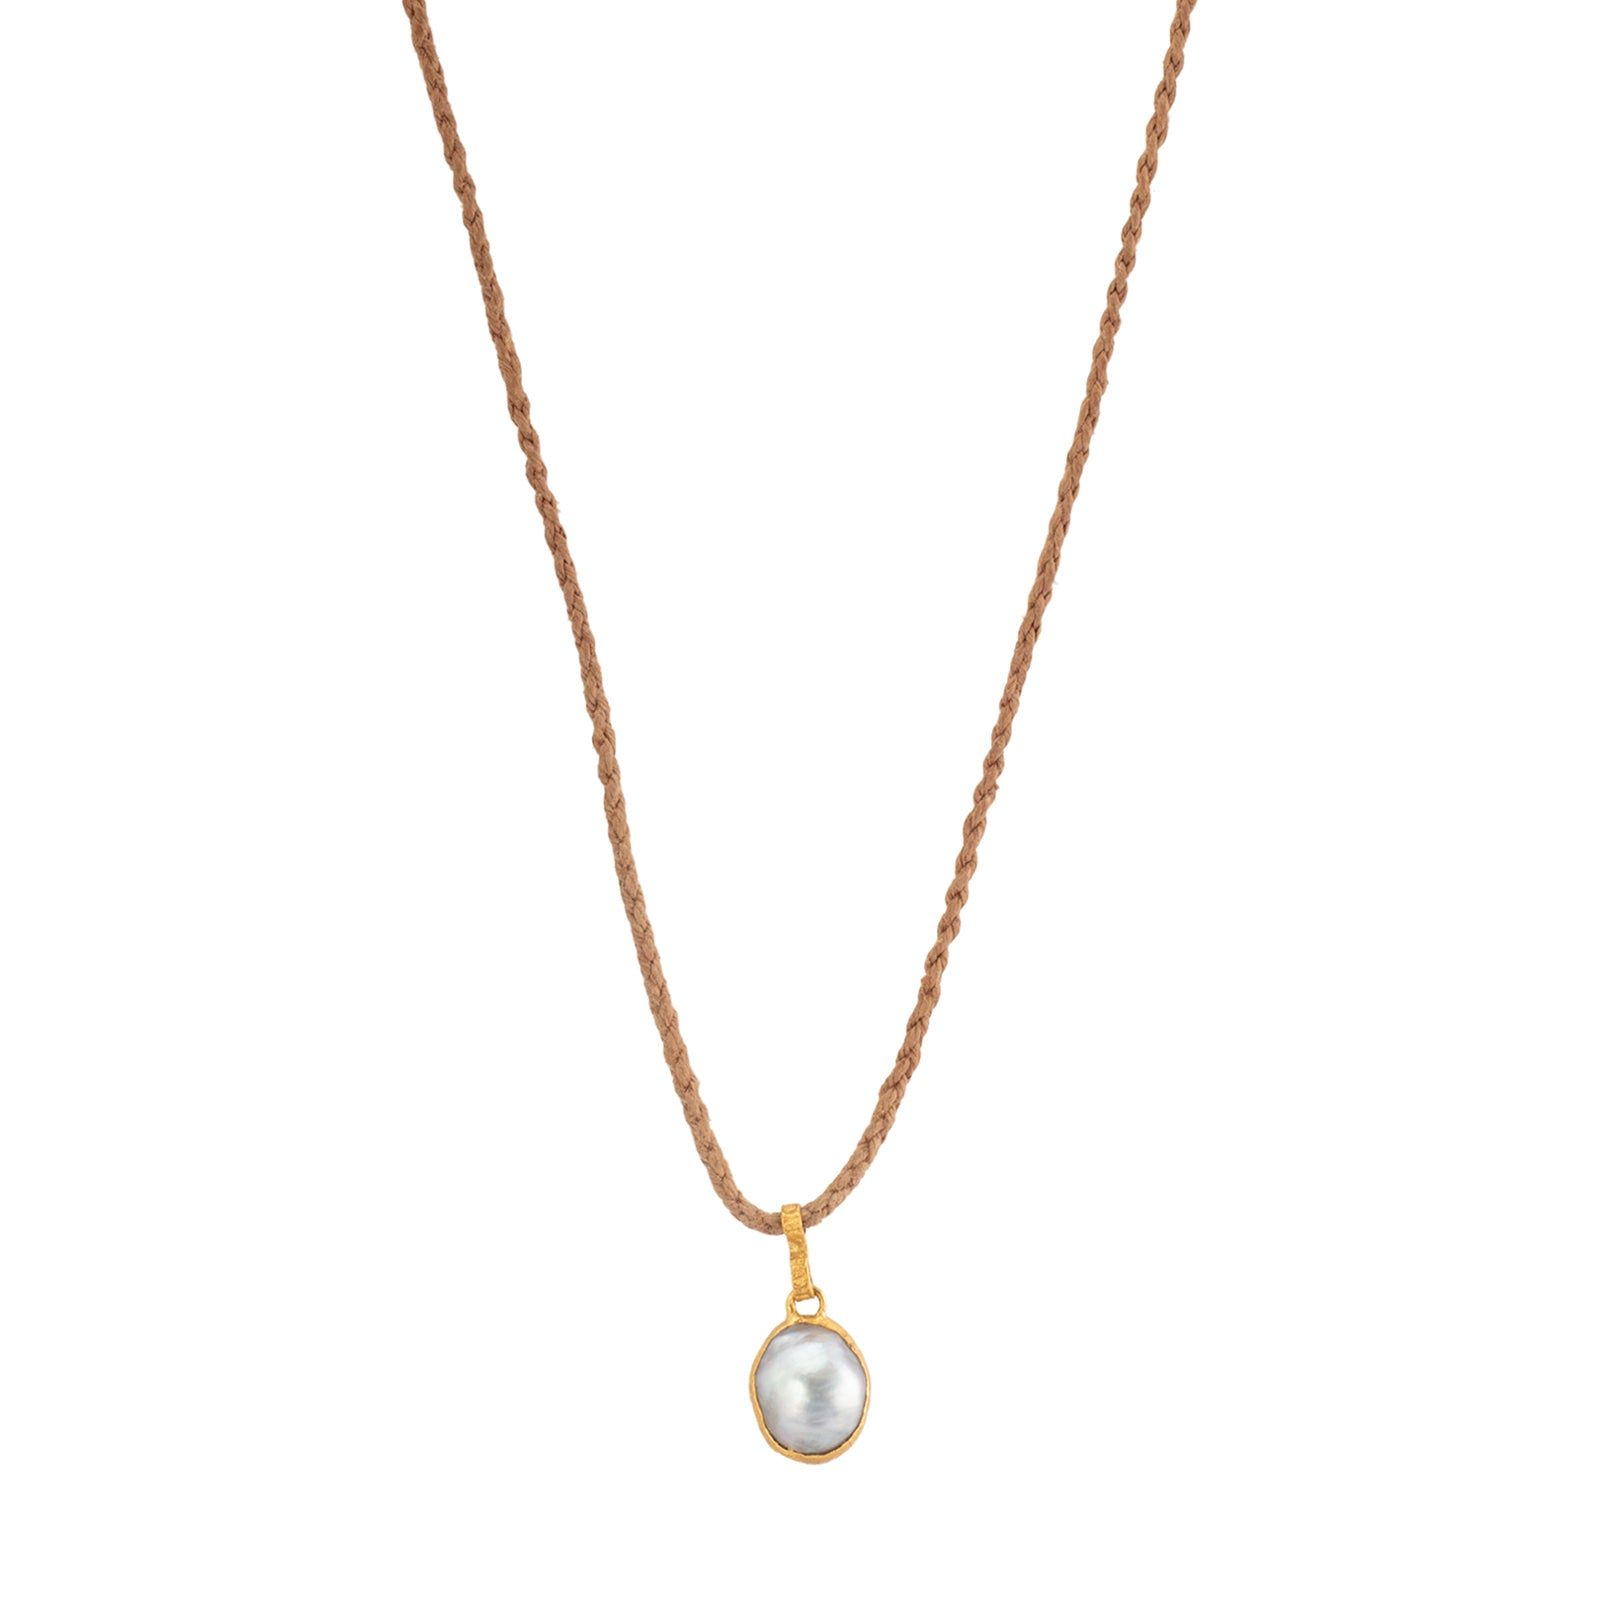 You Can Never Go Wrong When You Wear One Of These Elegant Pearl Necklaces